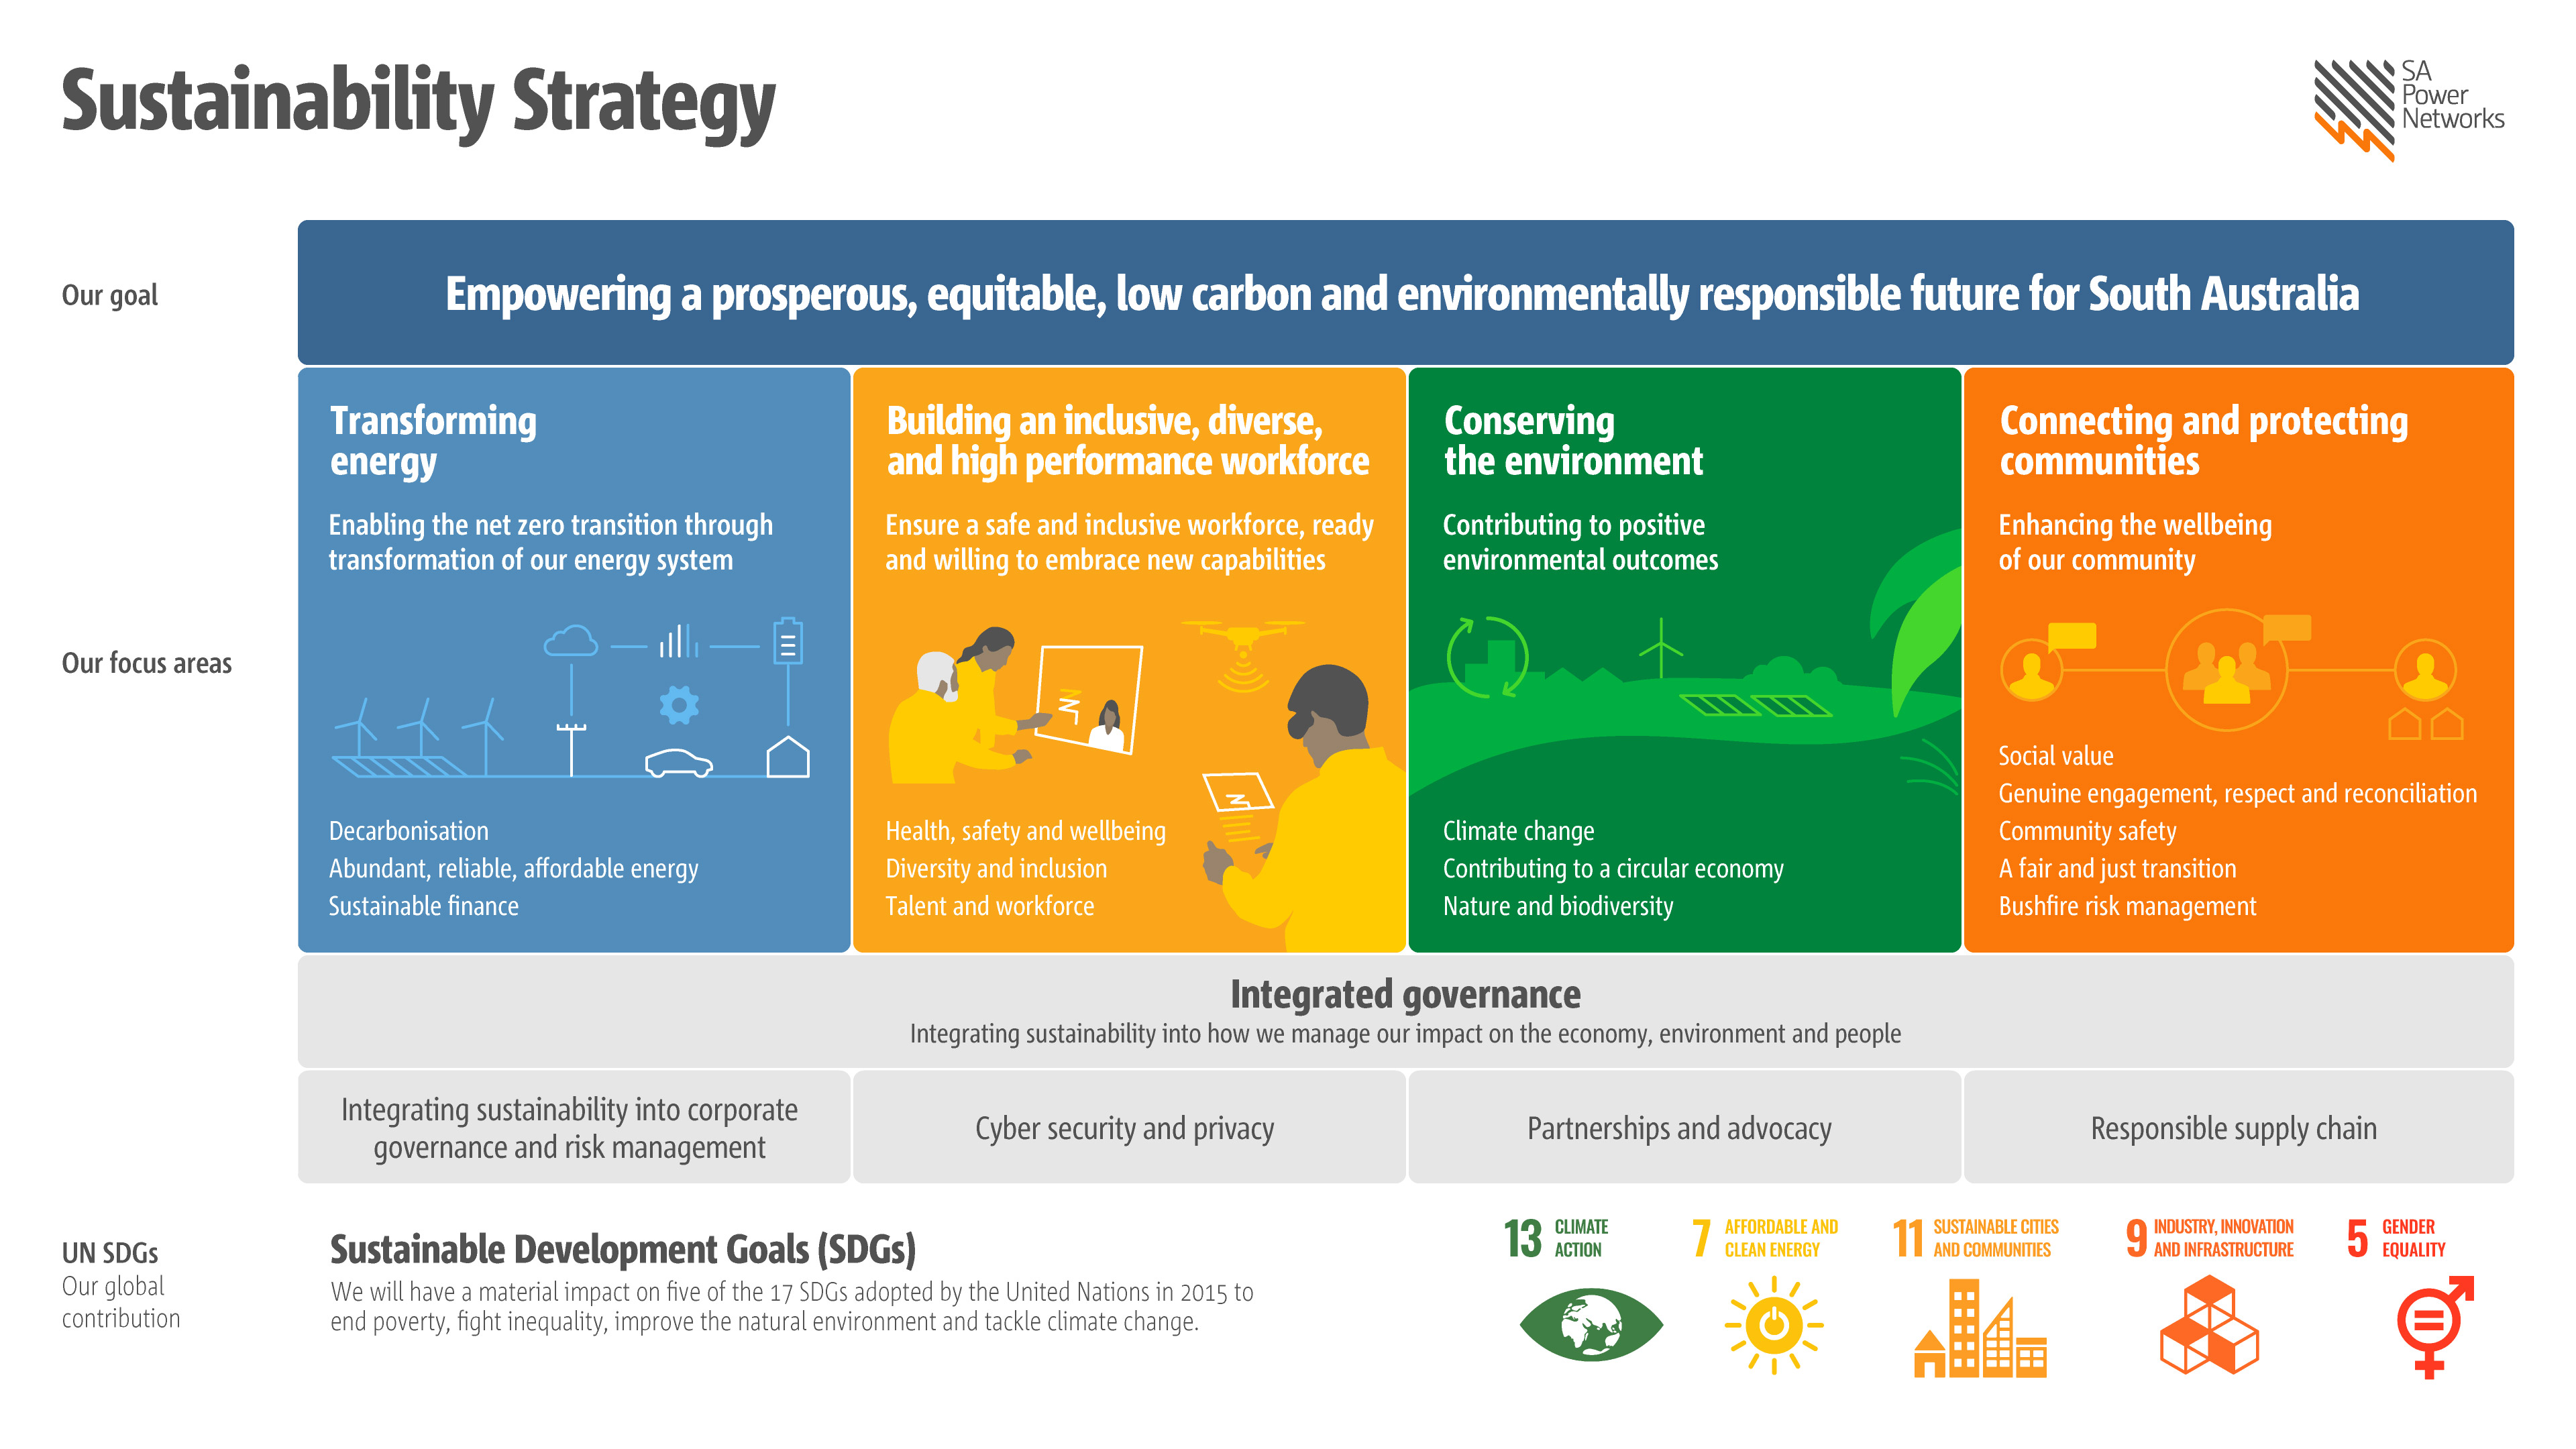 SA Power Networks' Sustainability Strategy on one page